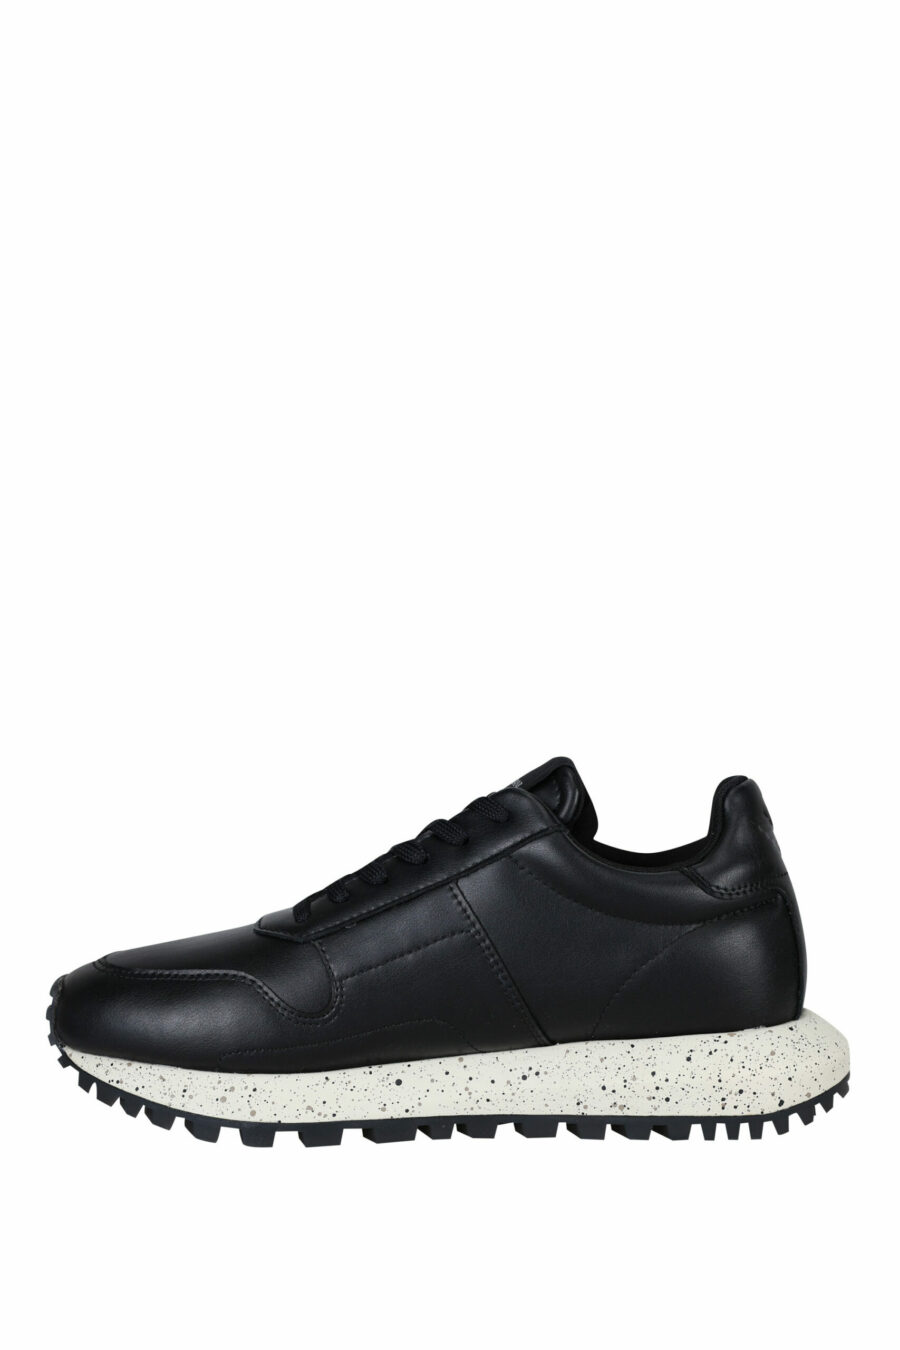 Black recycled leather trainers and minilogo - 8057767442187 2 scaled